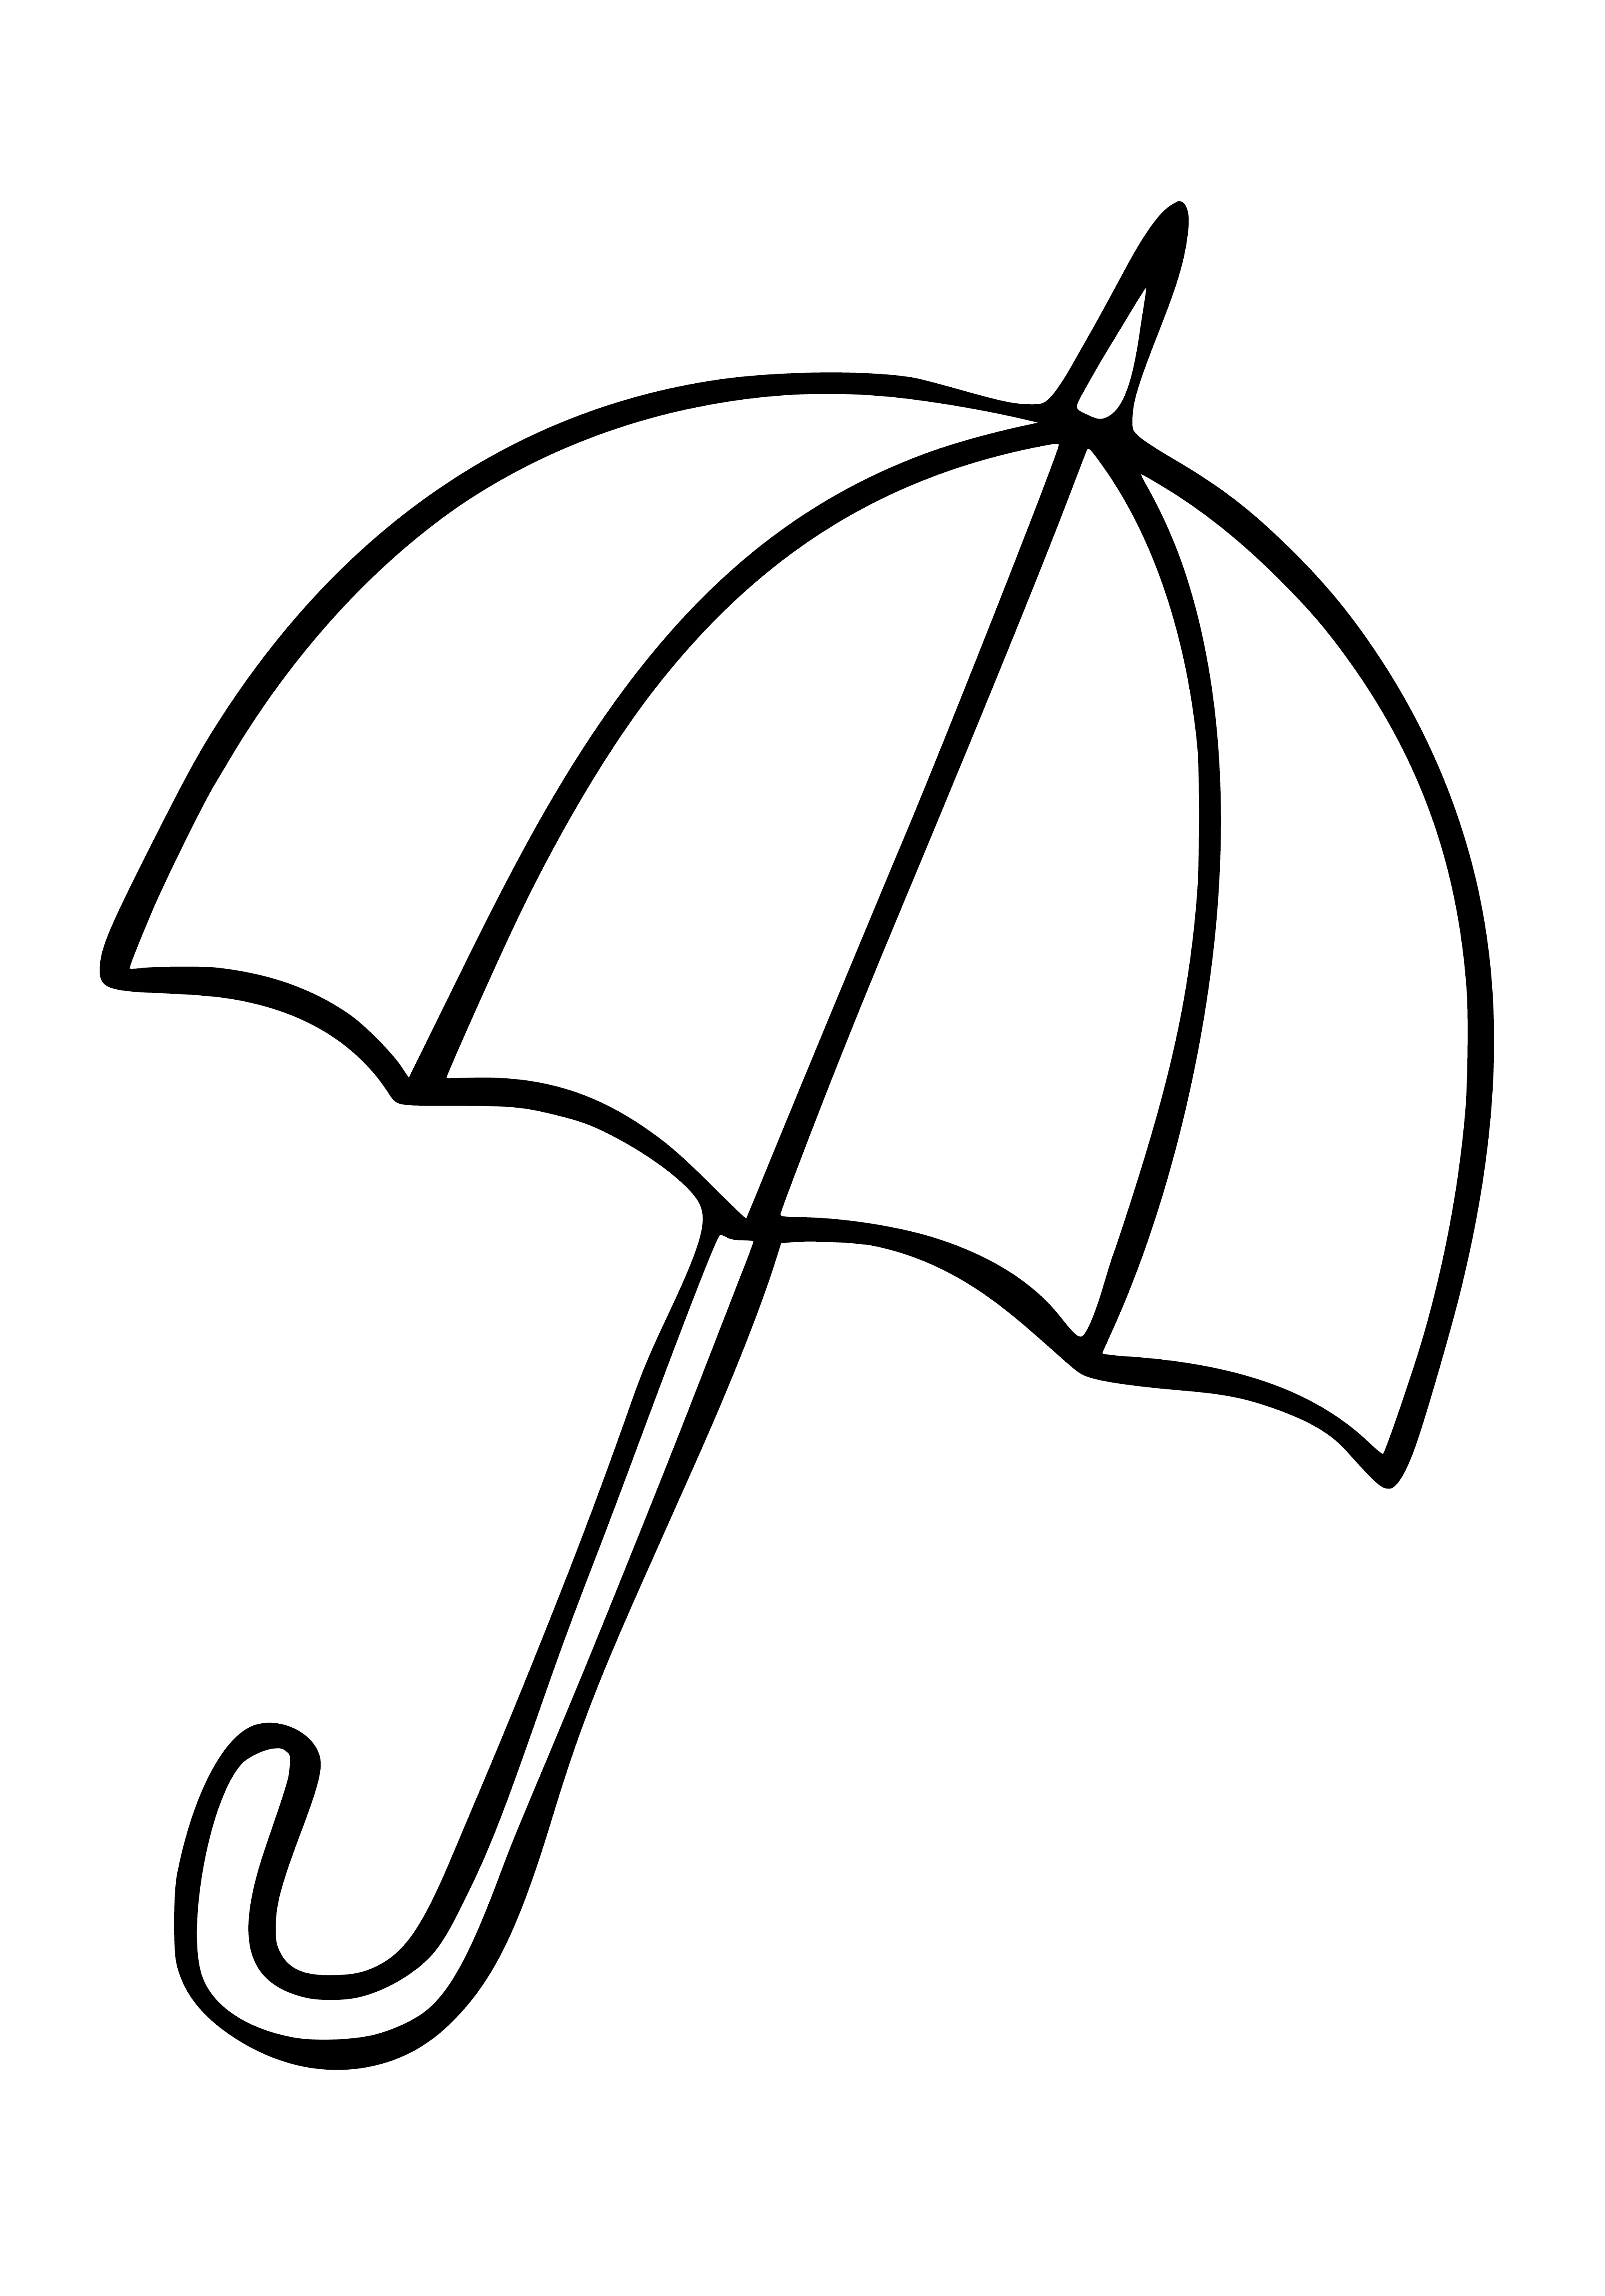 coloring page: Coloring pg for 3 yrs. old with umbrella & rainbows & stars falling from sky. #imagination #childplay #coloring #rainbow #umbrella